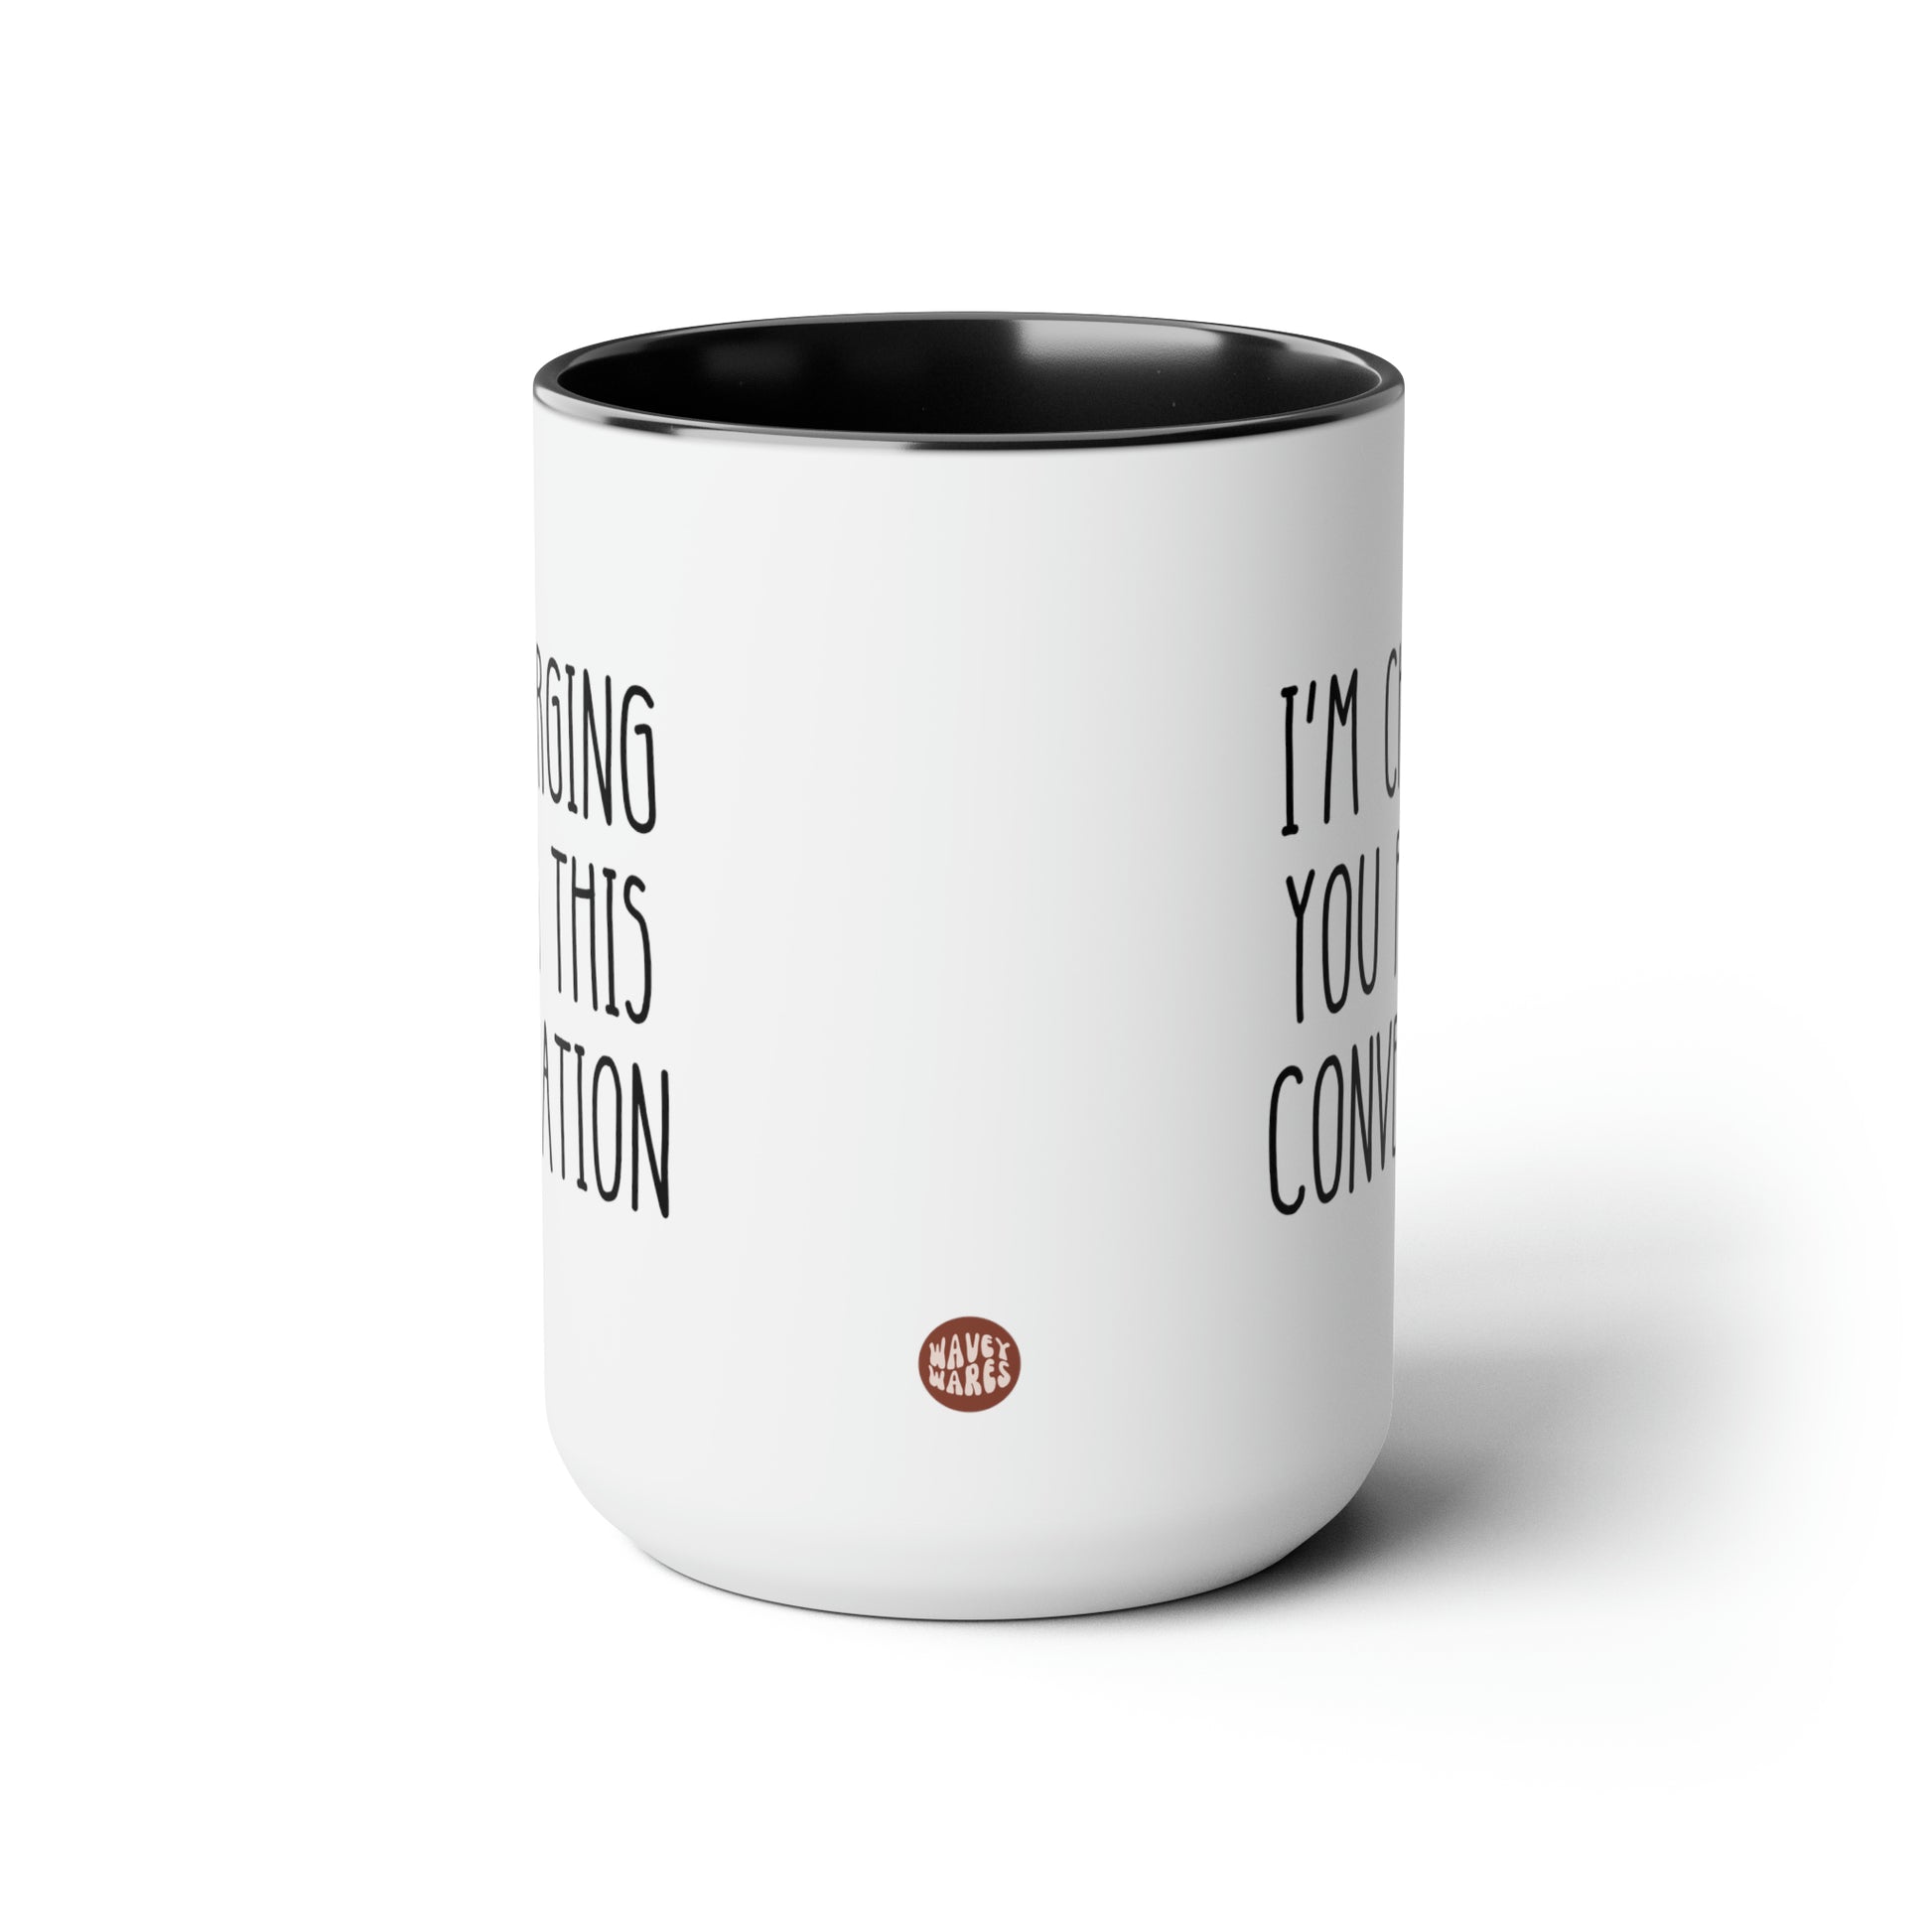 Im Charging You For This Conversation 15oz white with black accent funny large coffee mug gift for lawyer attorney student law judge waveywares wavey wares wavywares wavy wares side